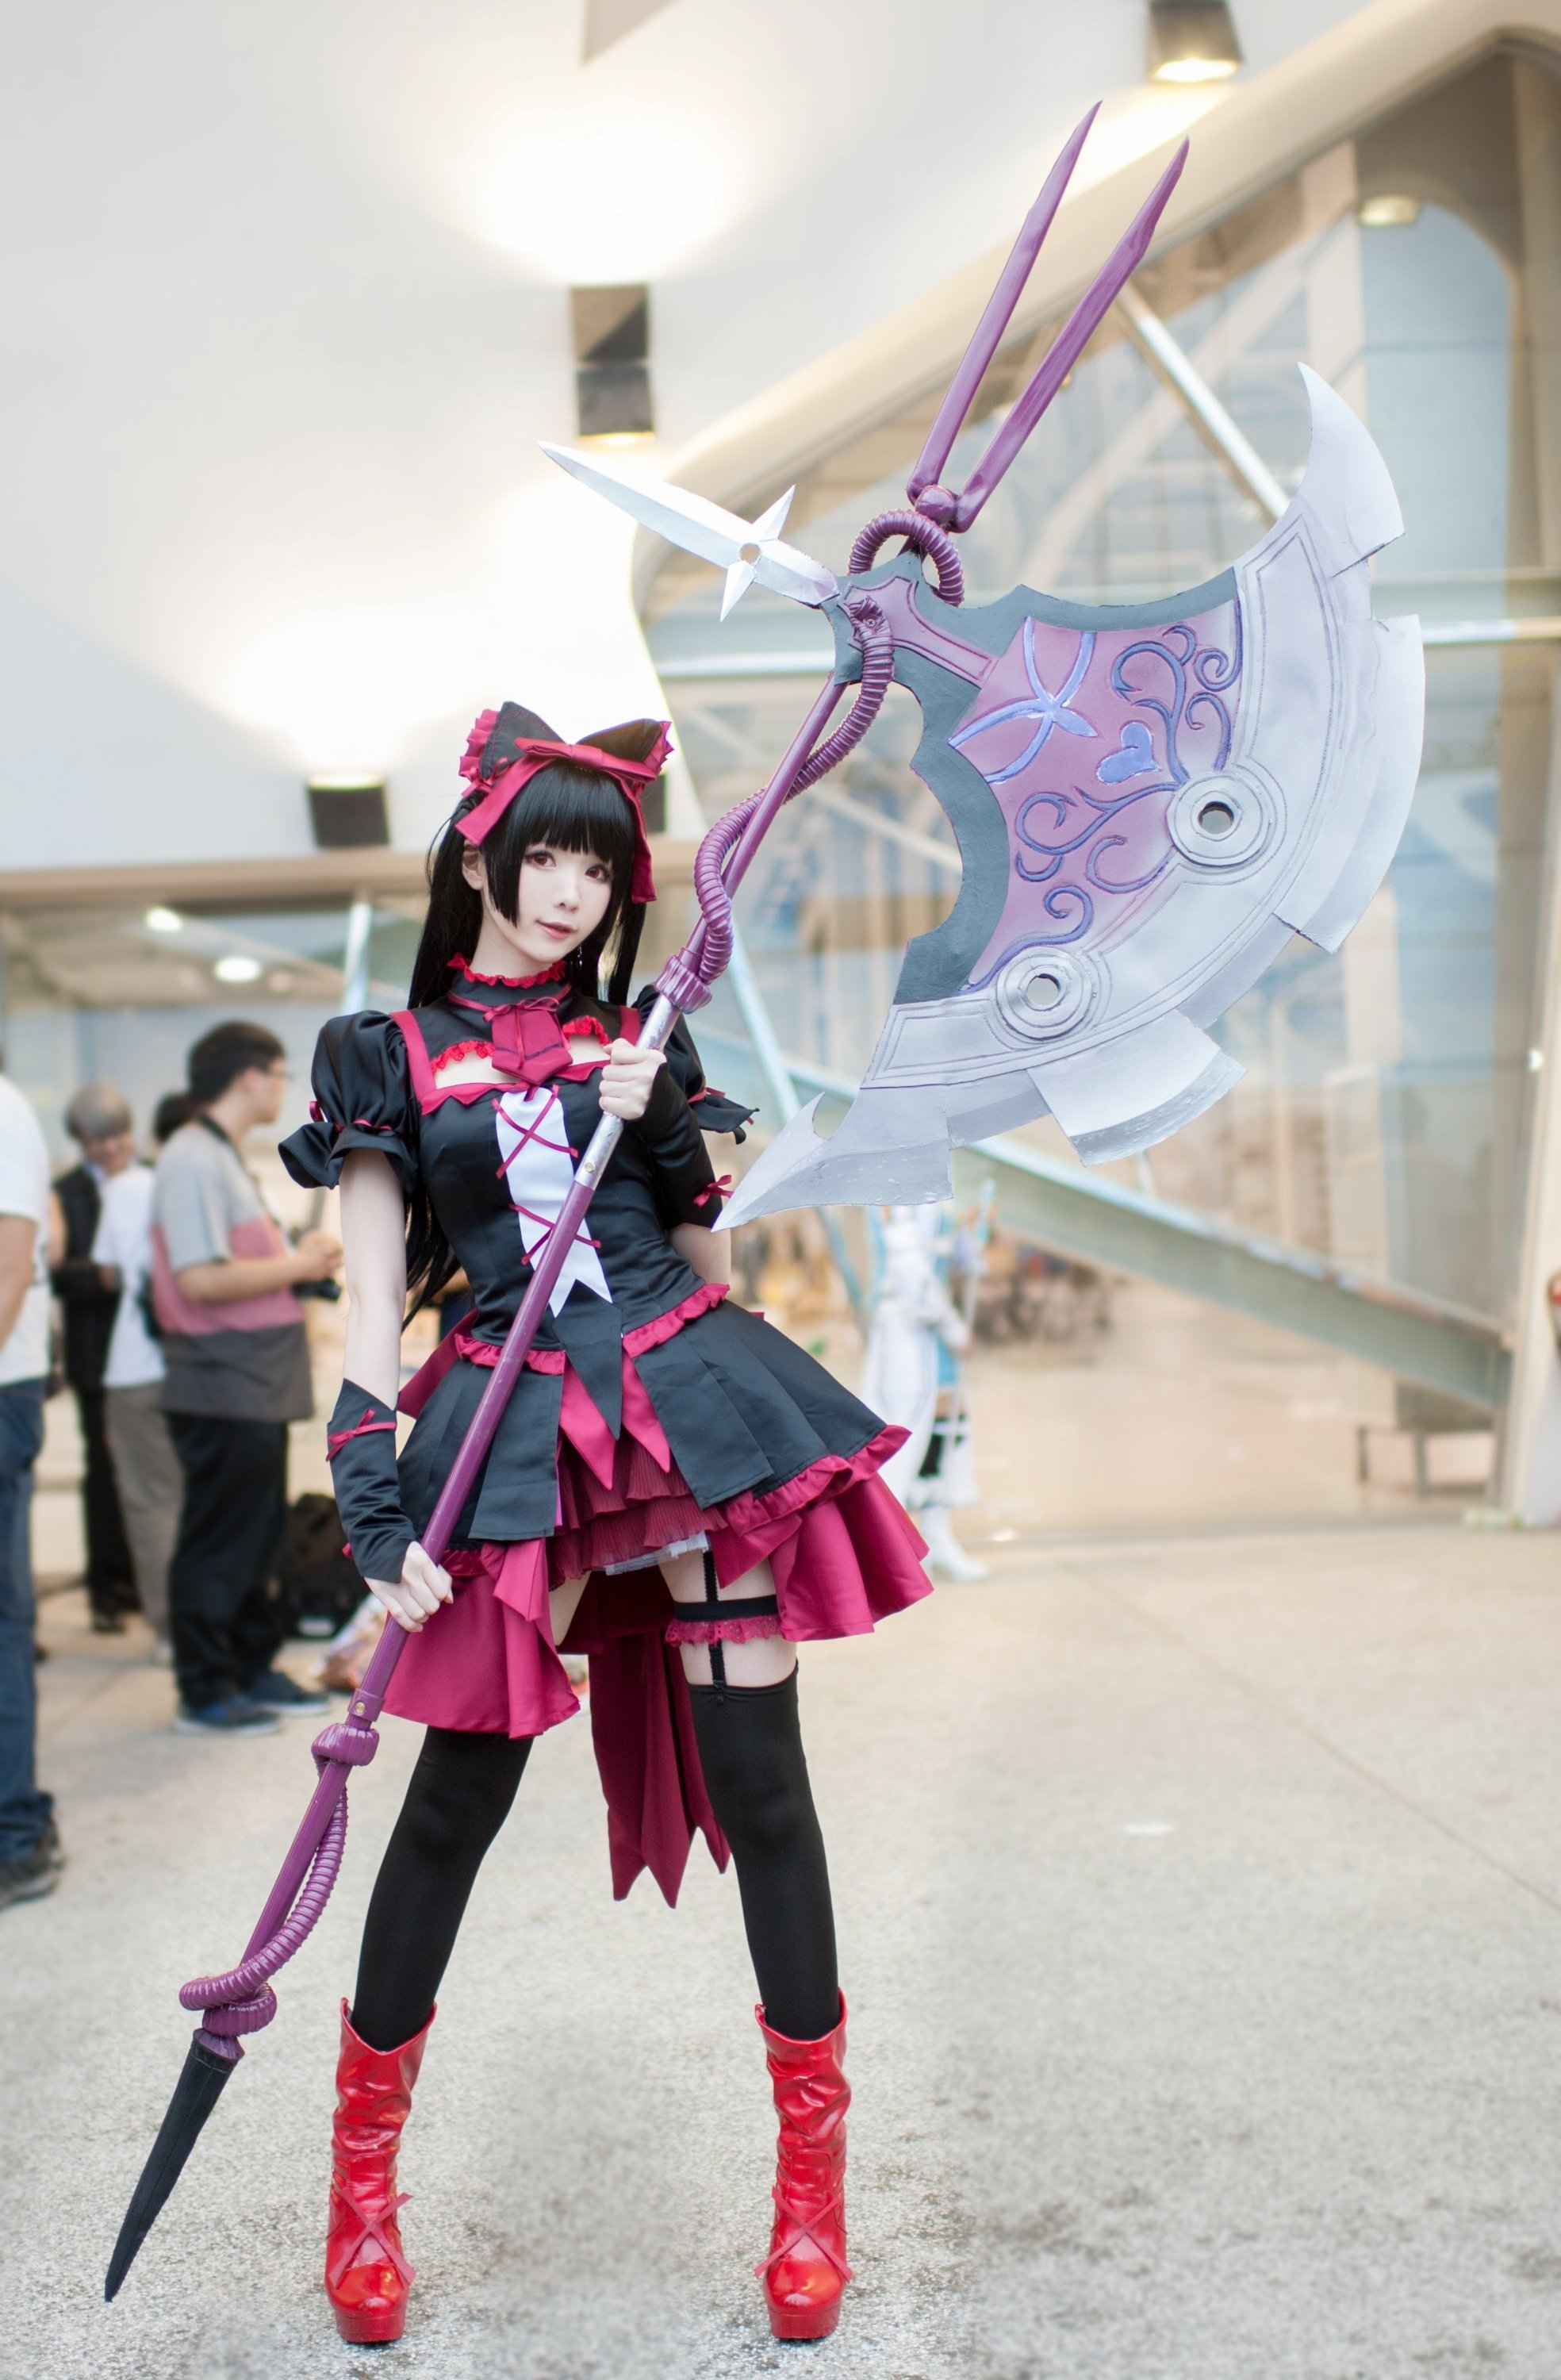 Anime Cosplay Ideas Female - 25 Ultimate Cosplay Ideas For Girls - The